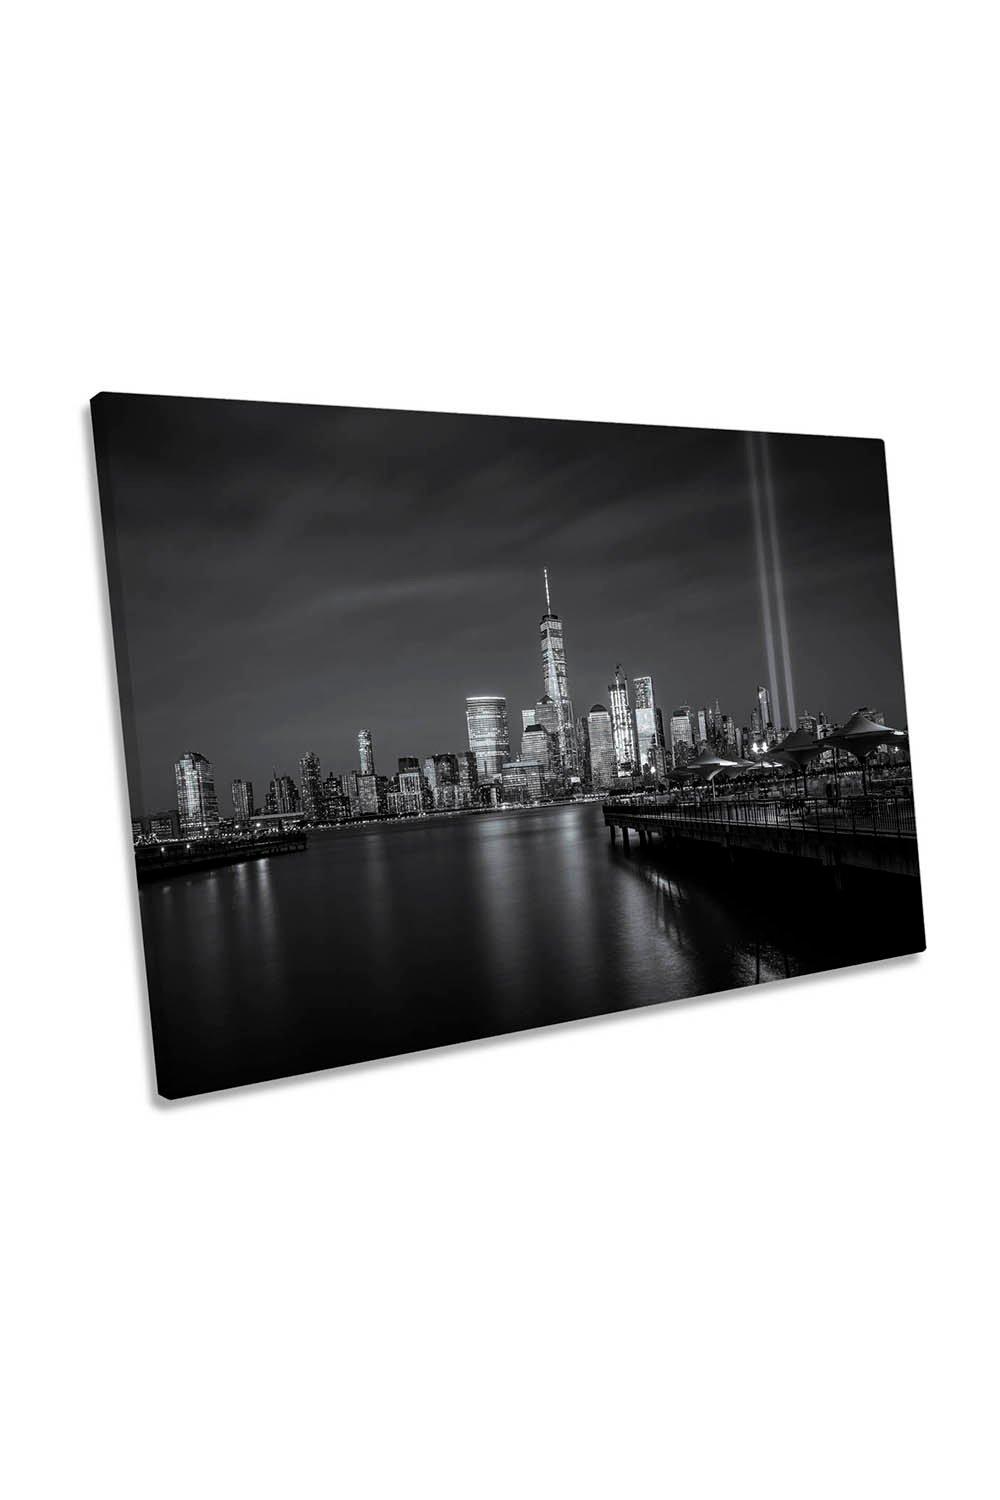 World Trade Centre Tribute New York City Canvas Wall Art Picture Print